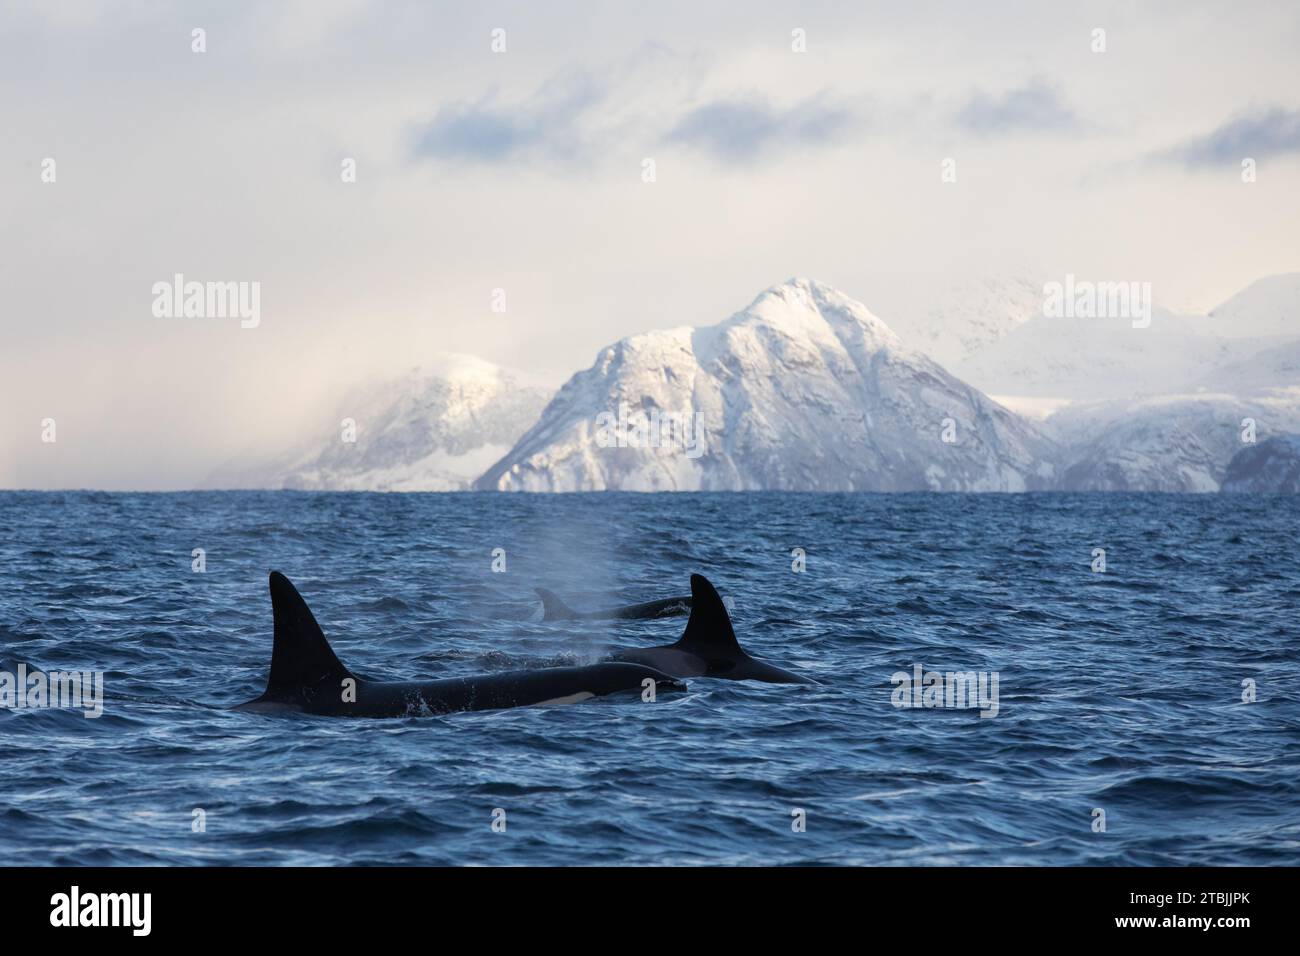 Orca (killer whale) swimming in the cold waters on Tromso, Norway. Stock Photo